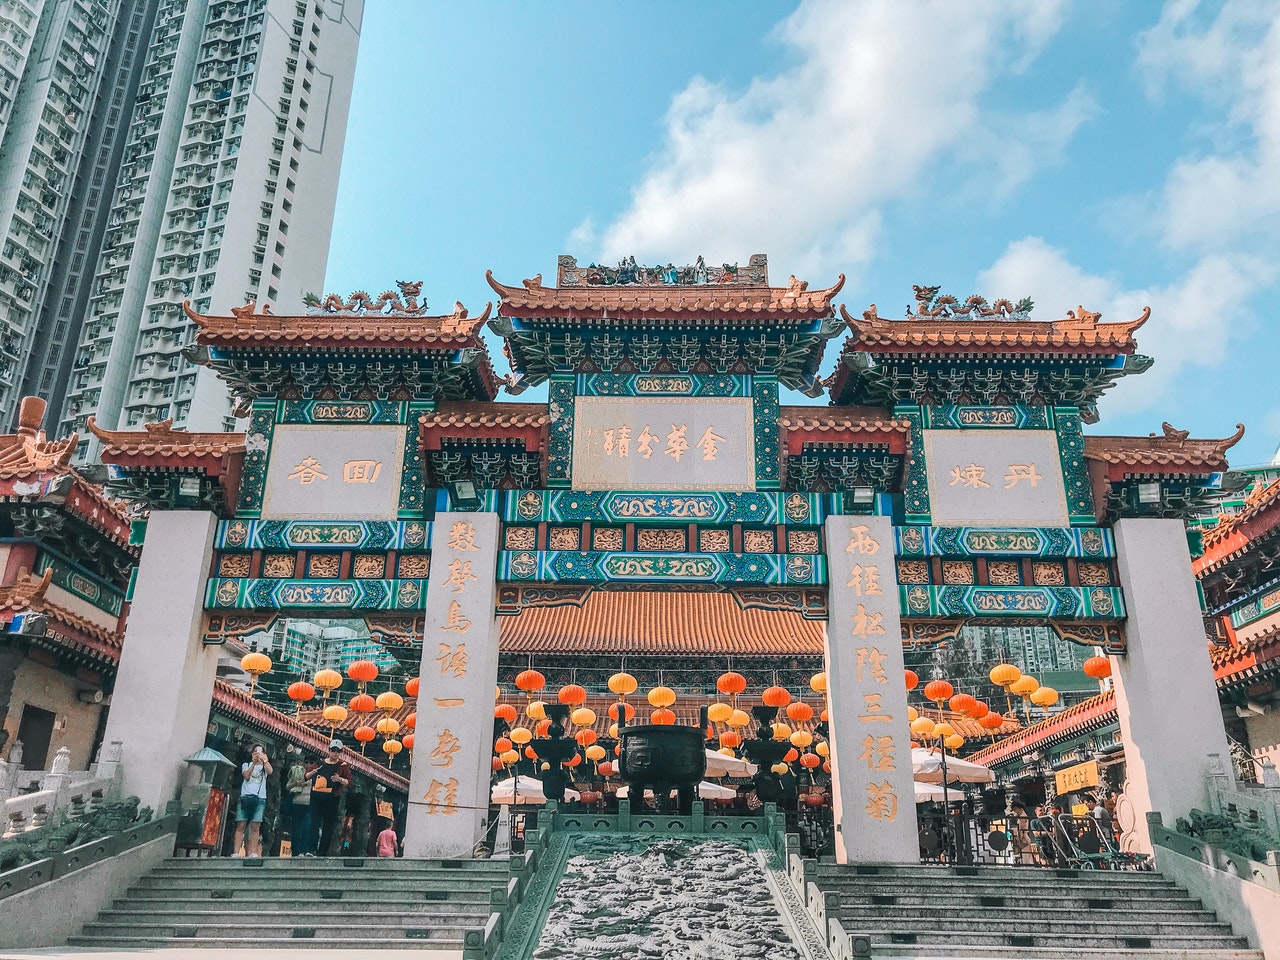 What is the best Hong Kong sightseeing point for solo travelers?